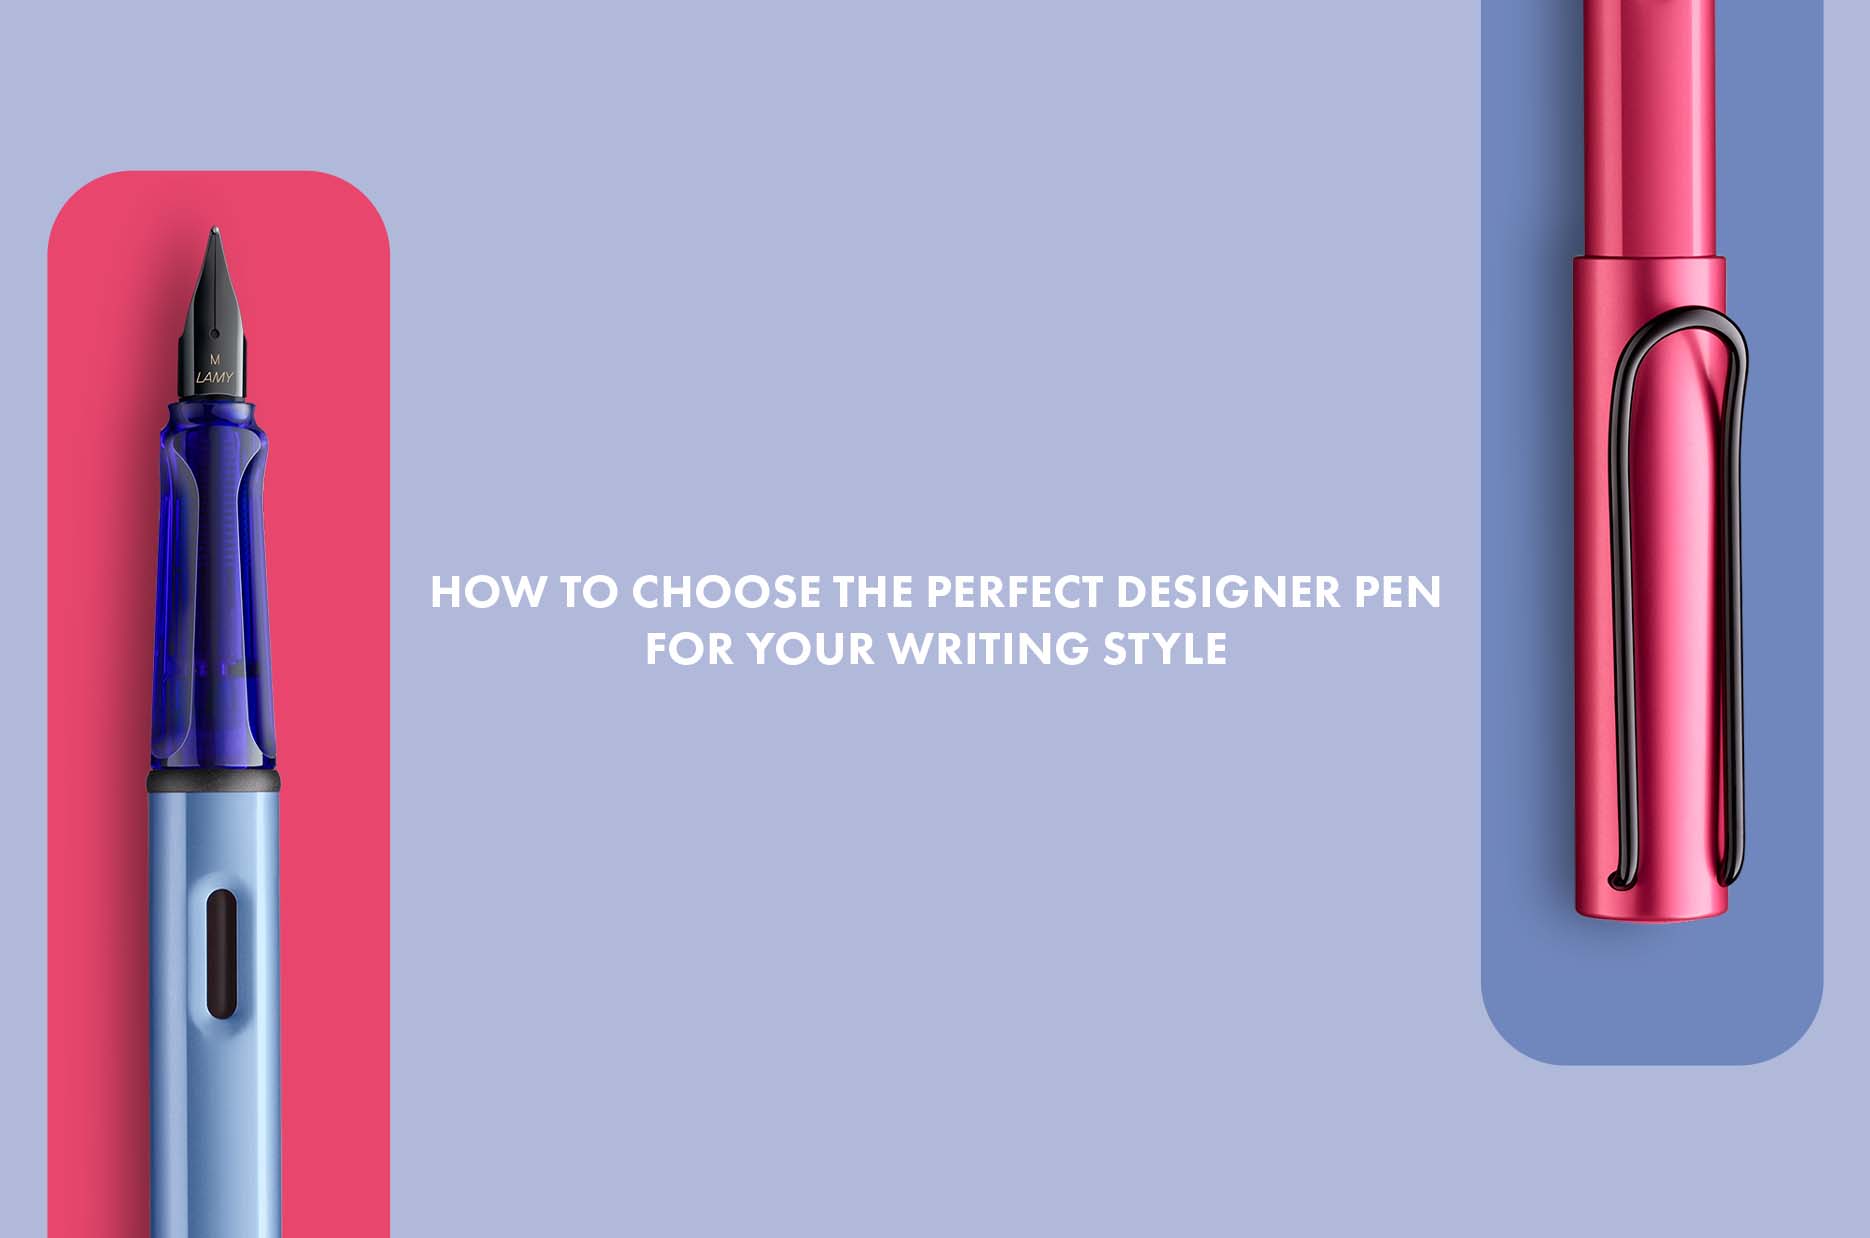 How To Choose The Perfect Designer Pen For Your Writing Style